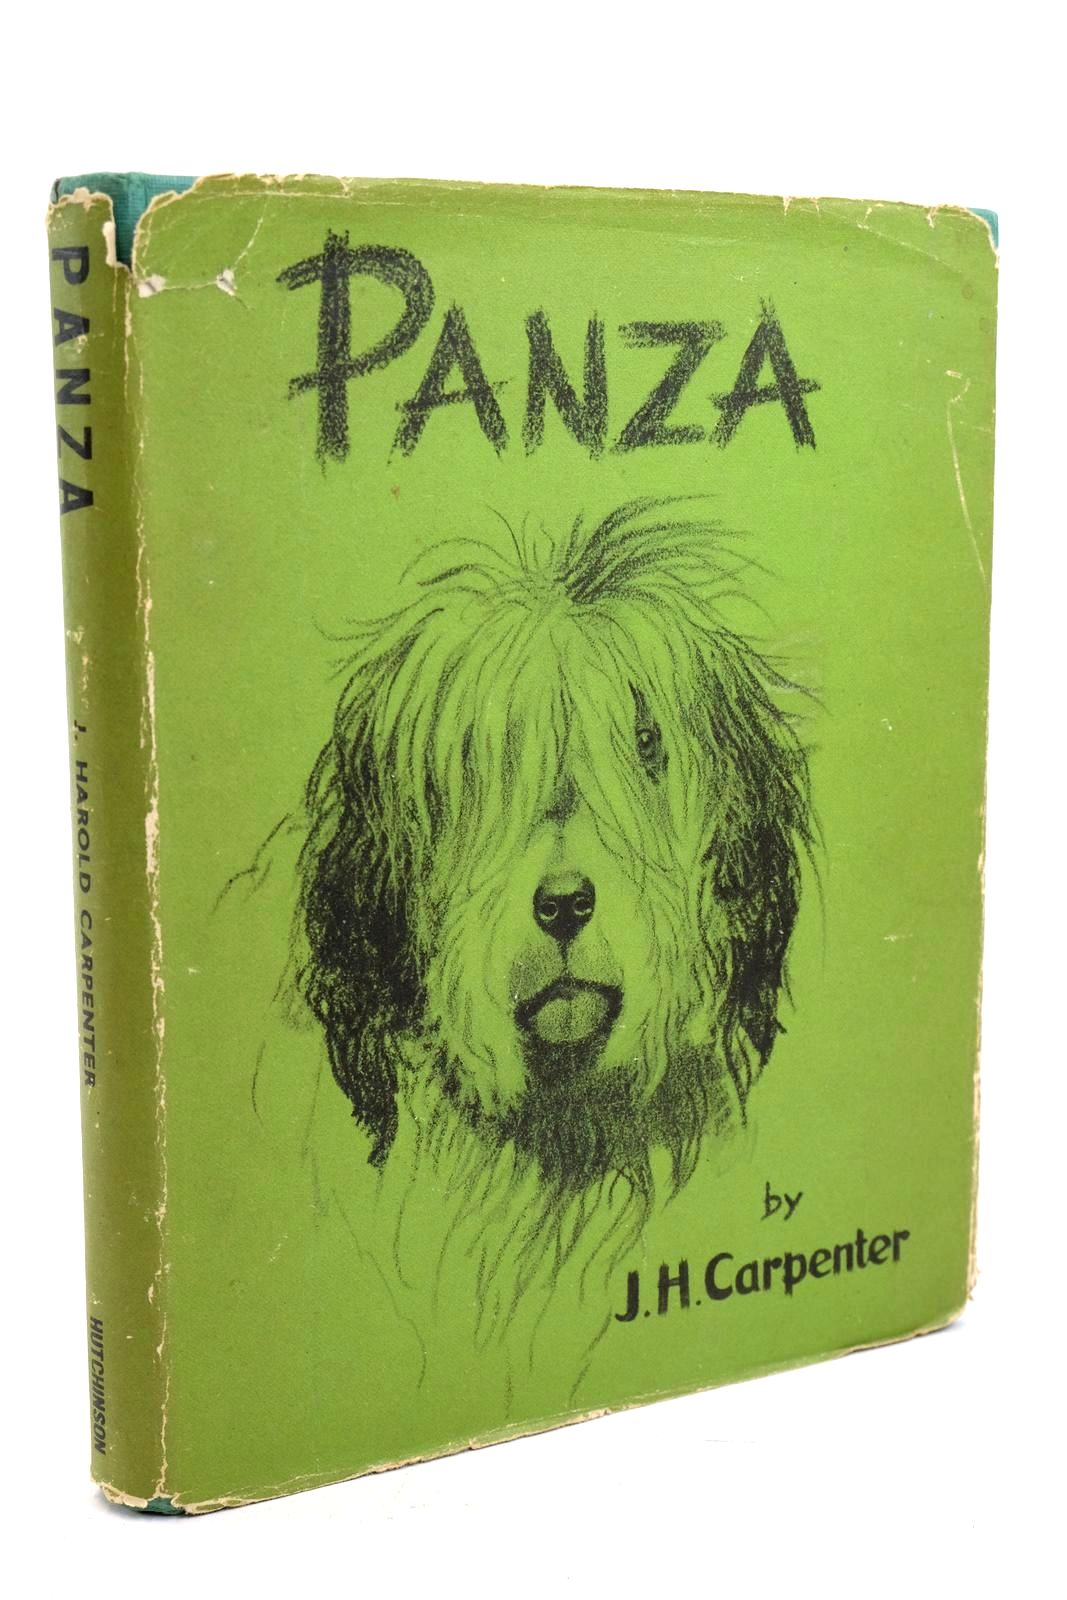 Photo of PANZA written by Carpenter, J. Harold illustrated by Barrington, G.W. published by Hutchinson's Books for Young People (STOCK CODE: 1321609)  for sale by Stella & Rose's Books